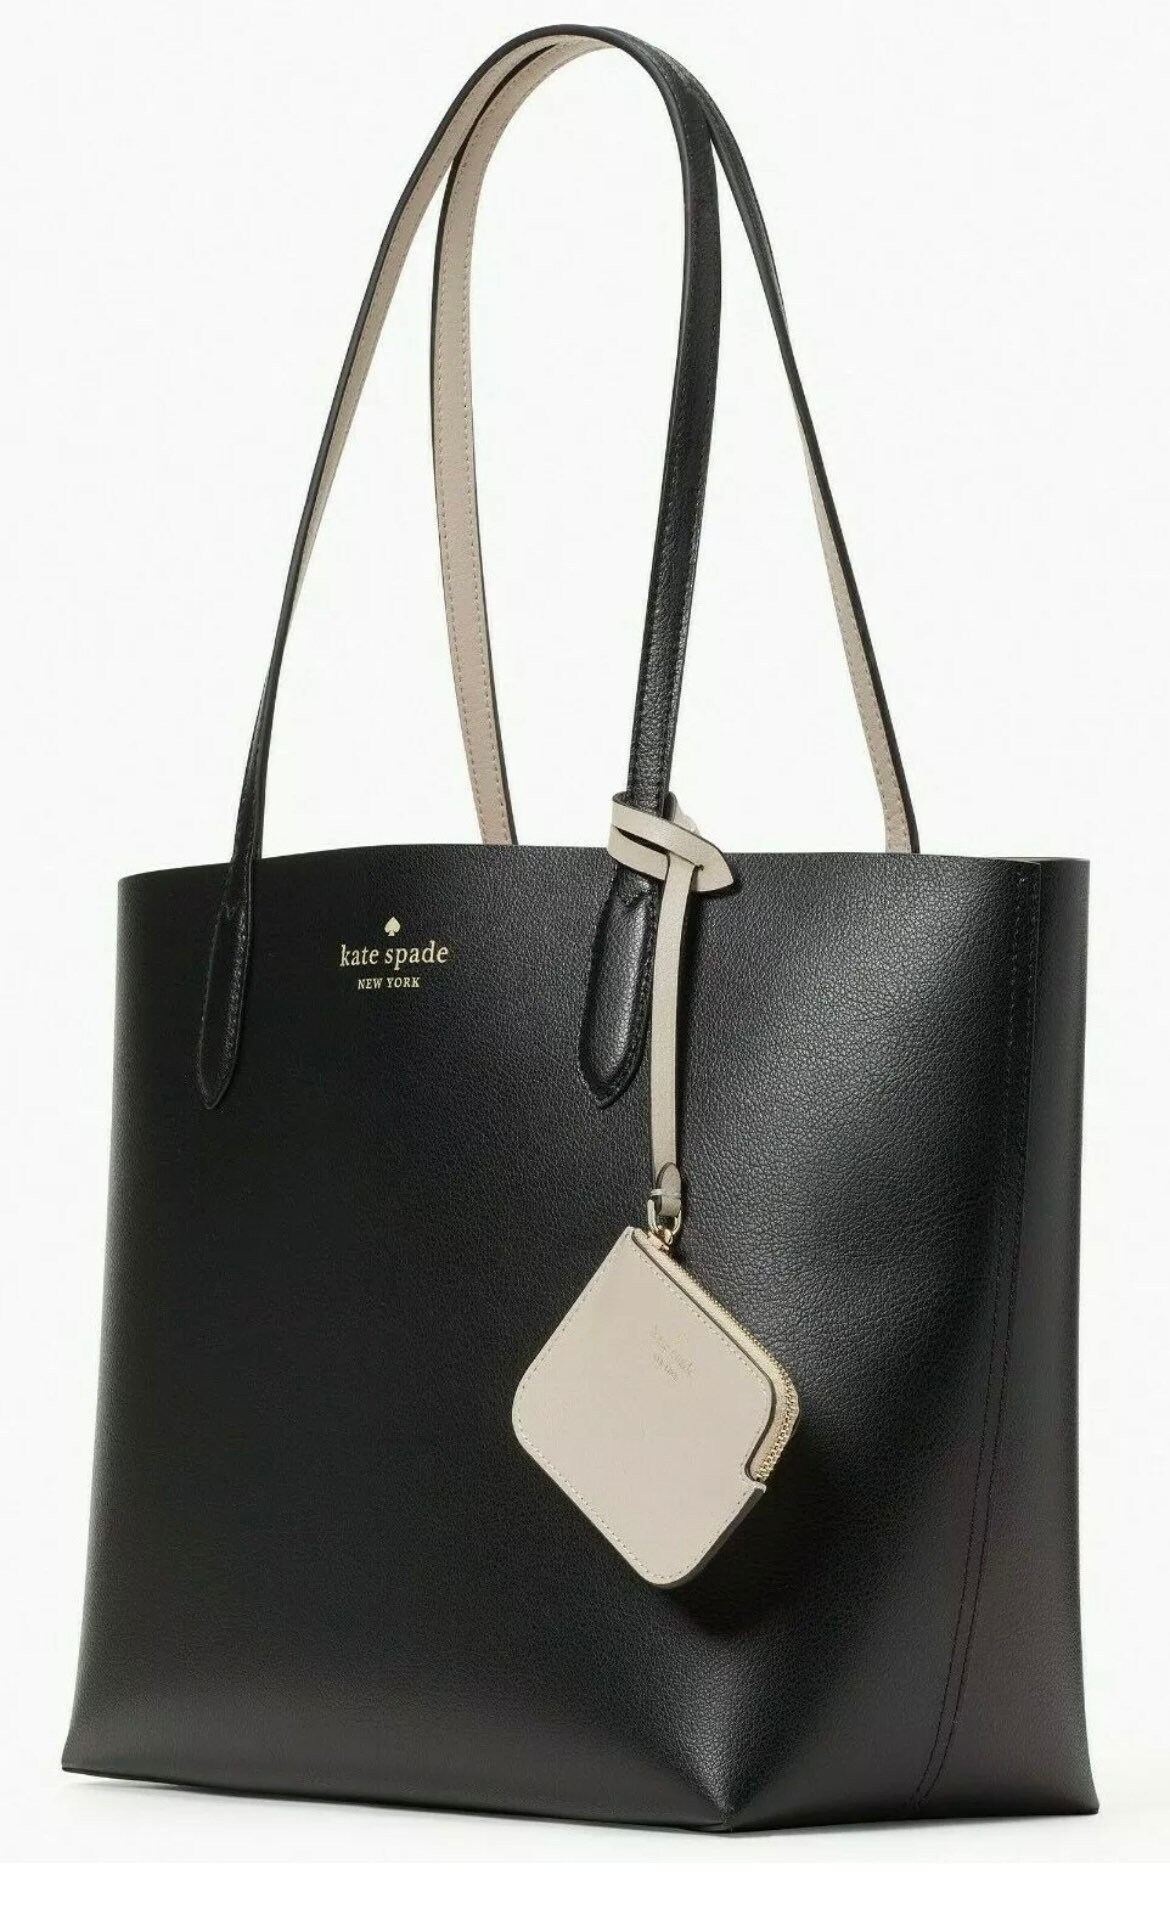 Kate Spade Ava Reversible Black Leather Tote Beige Pouch NWT K6052 359 ...